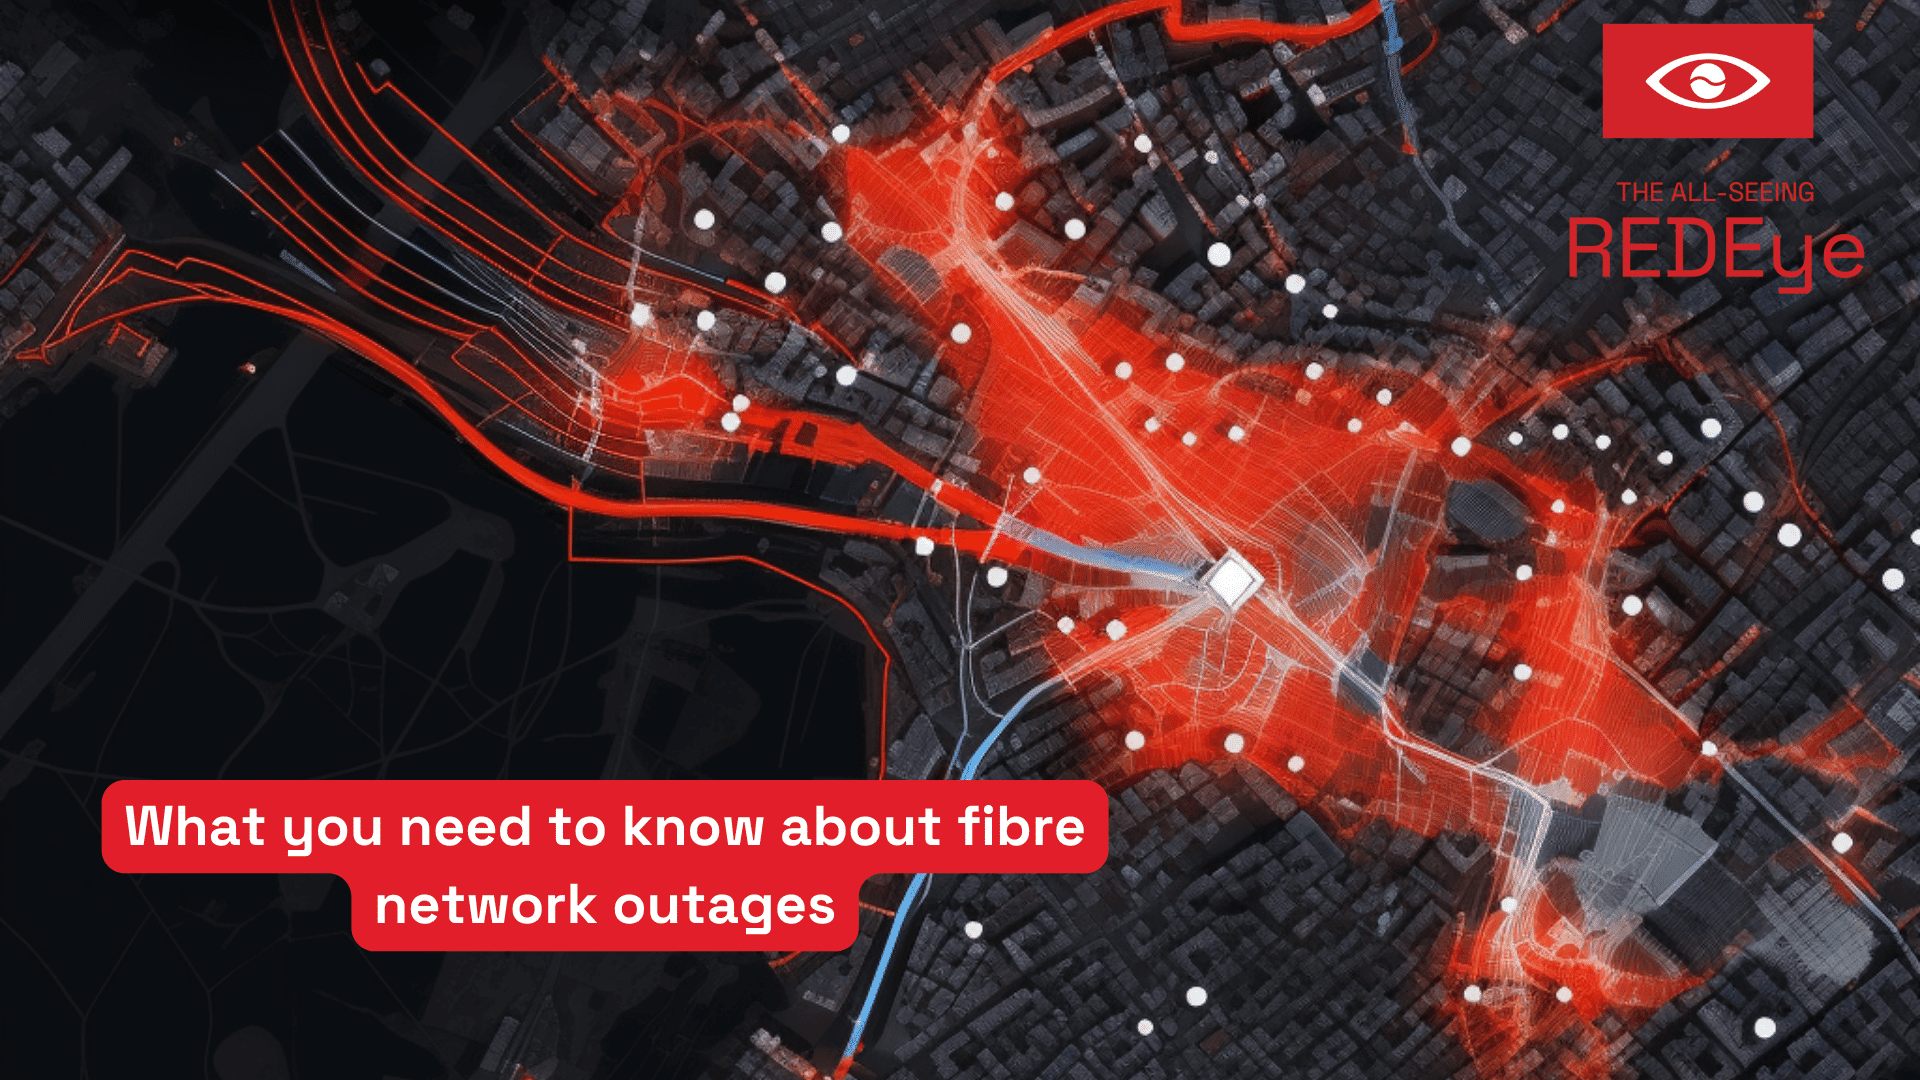 What you need to know about fiber network outages